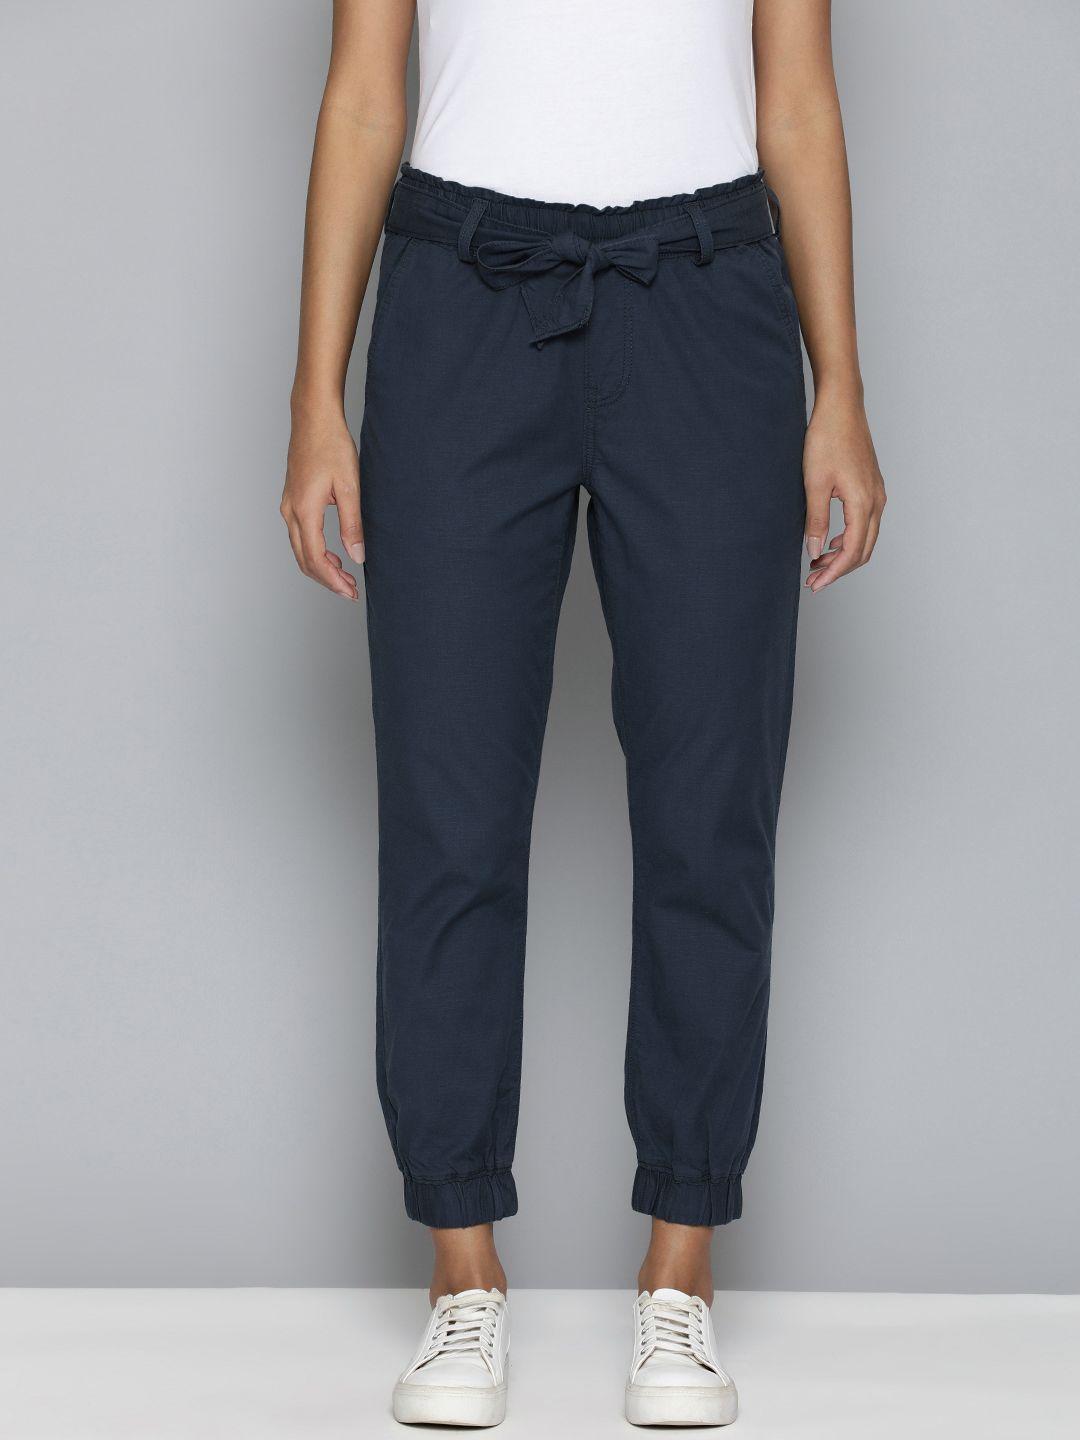 levis women solid mid-rise regular fit joggers comes with a belt